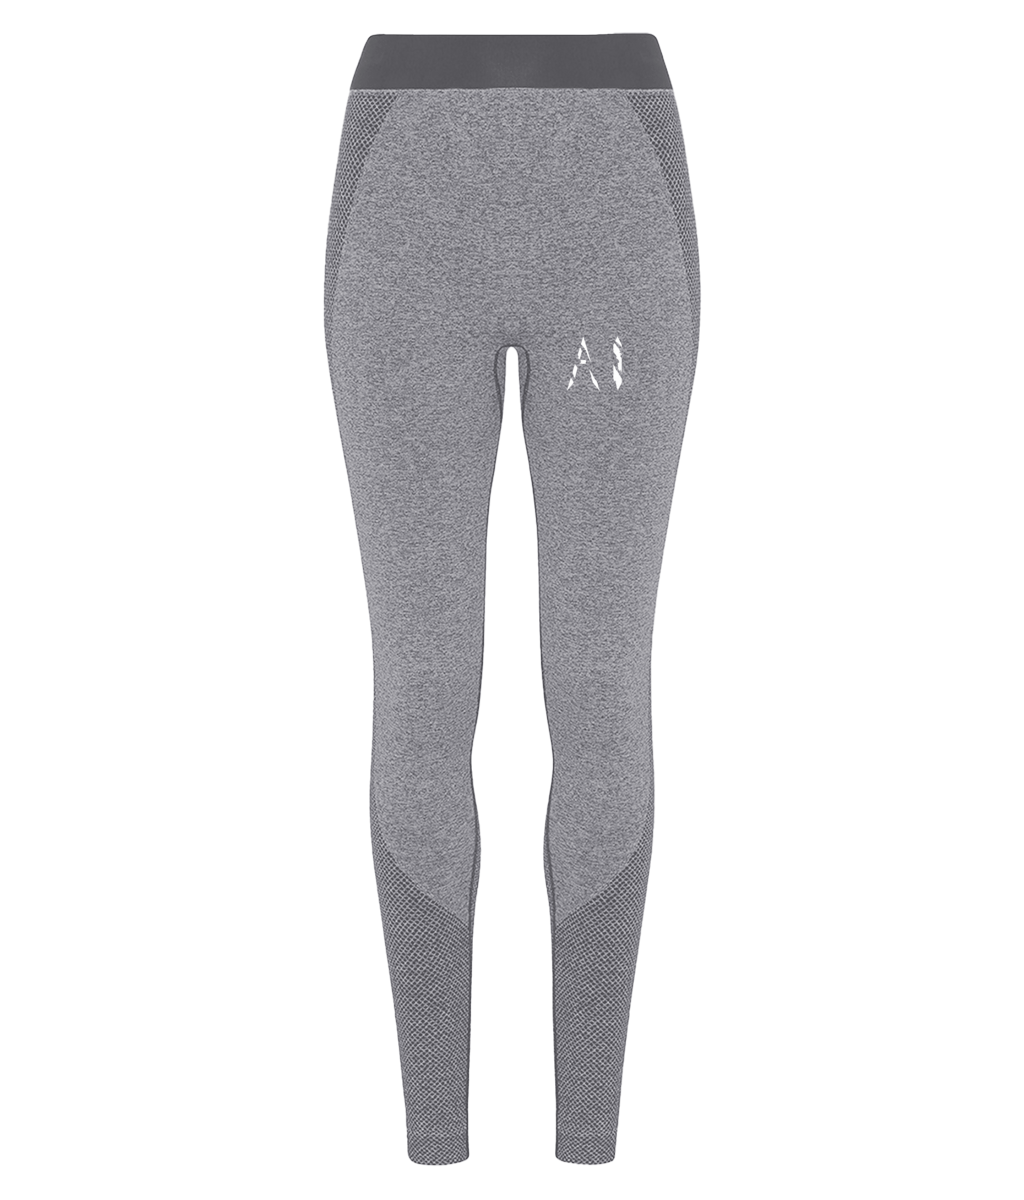 Womens grey Athletic Seamless Sports Leggings with White AI logo on upper thigh